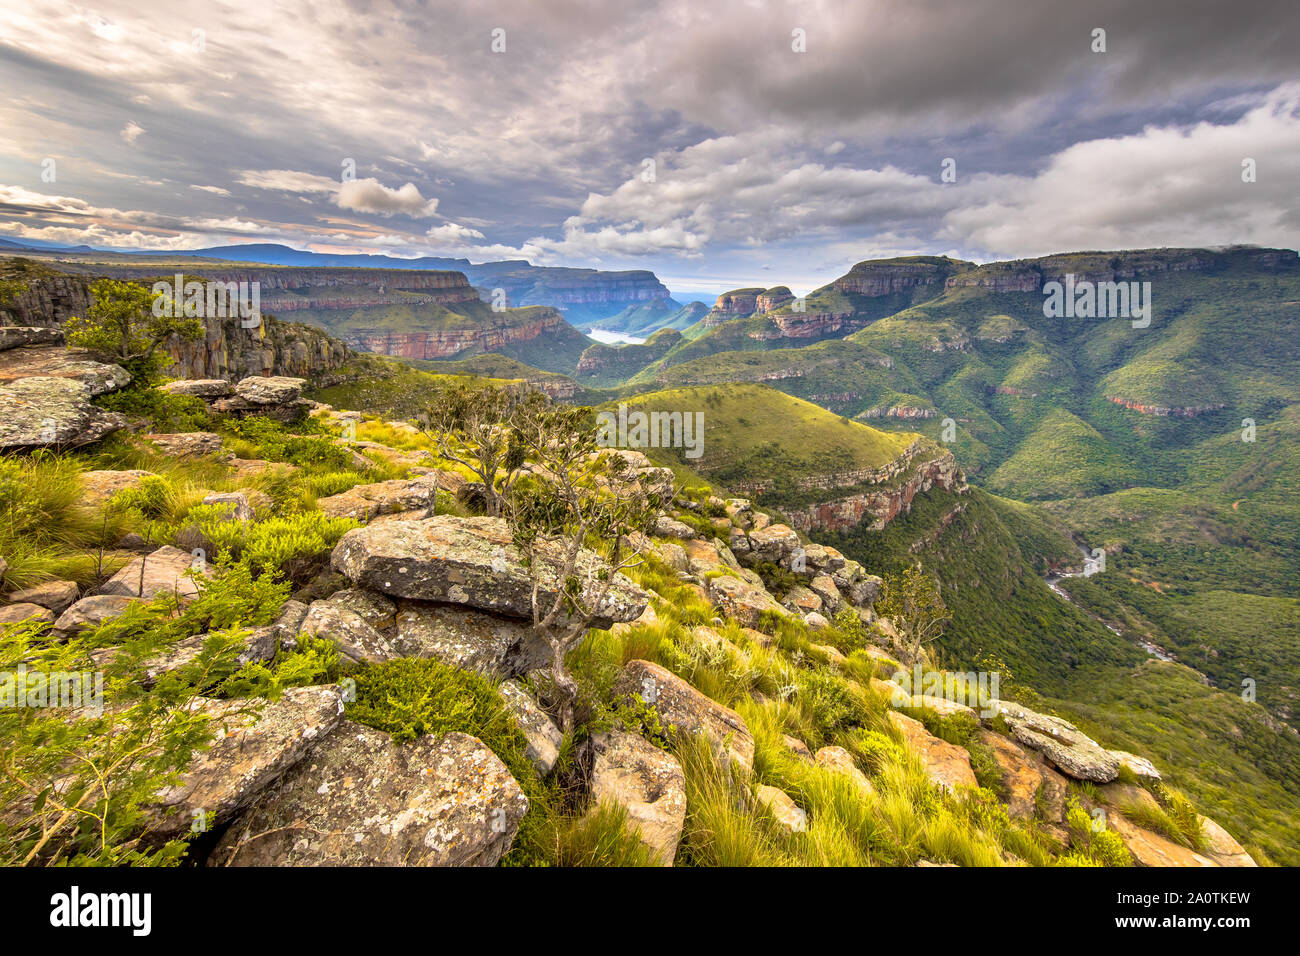 Natural vegetation and rocks at viewpoint over panoramic scenery of Blyde river Canyon Mpumalanga South Africa Stock Photo